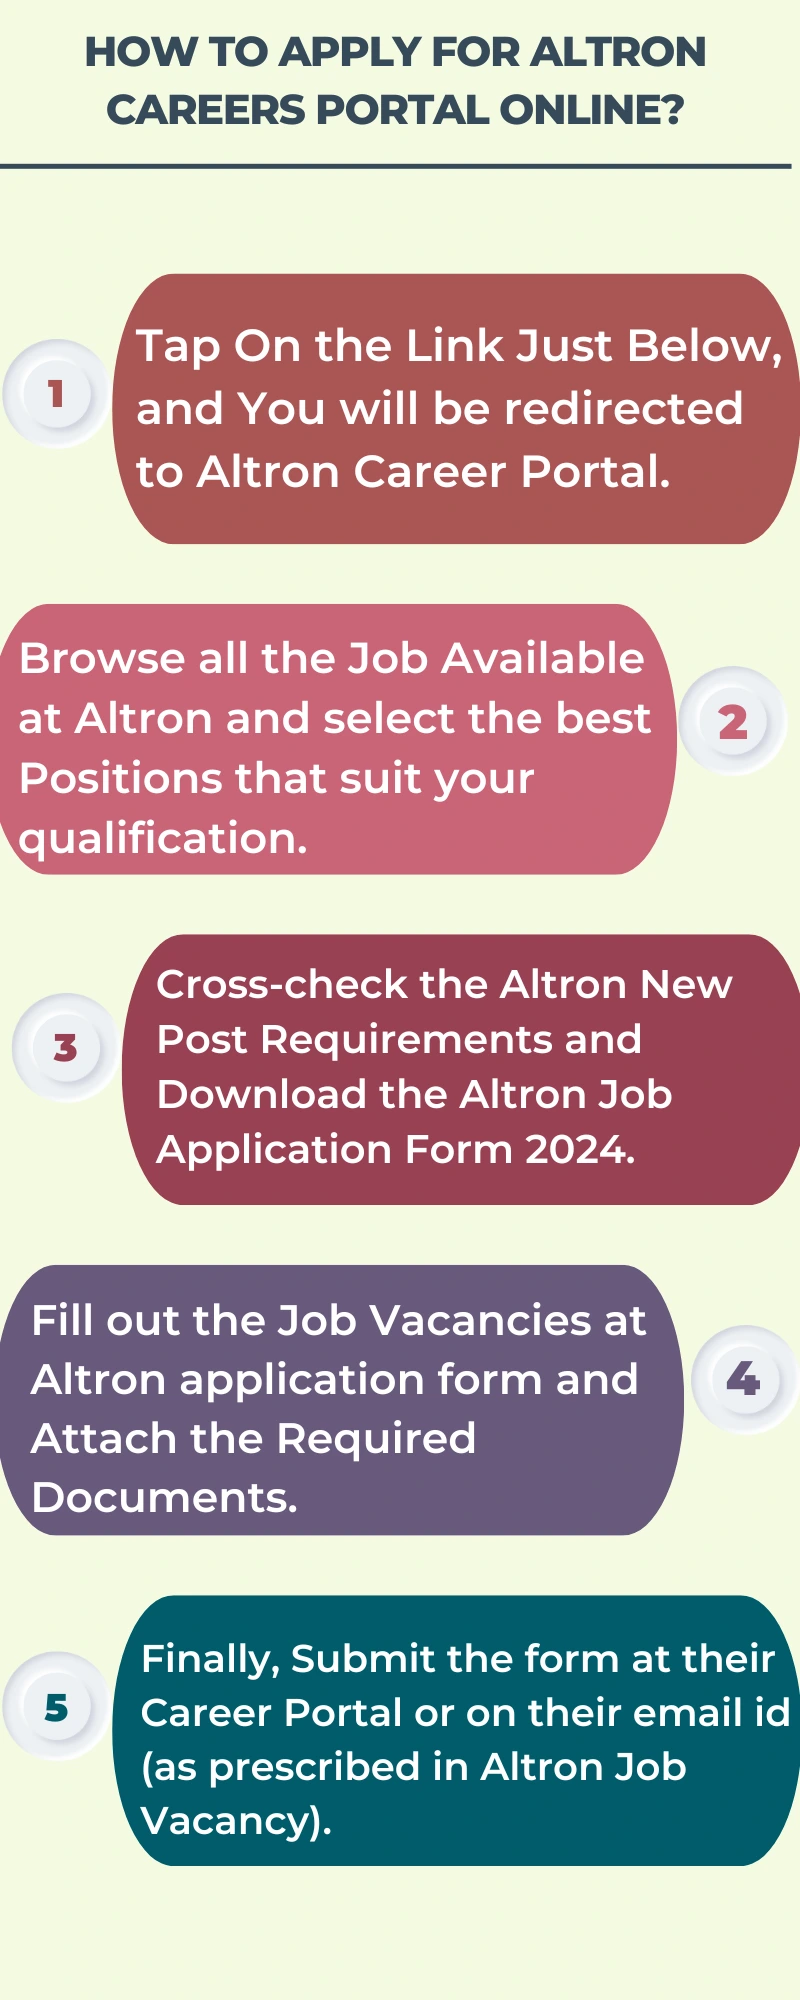 How To Apply for Altron Careers Portal Online?